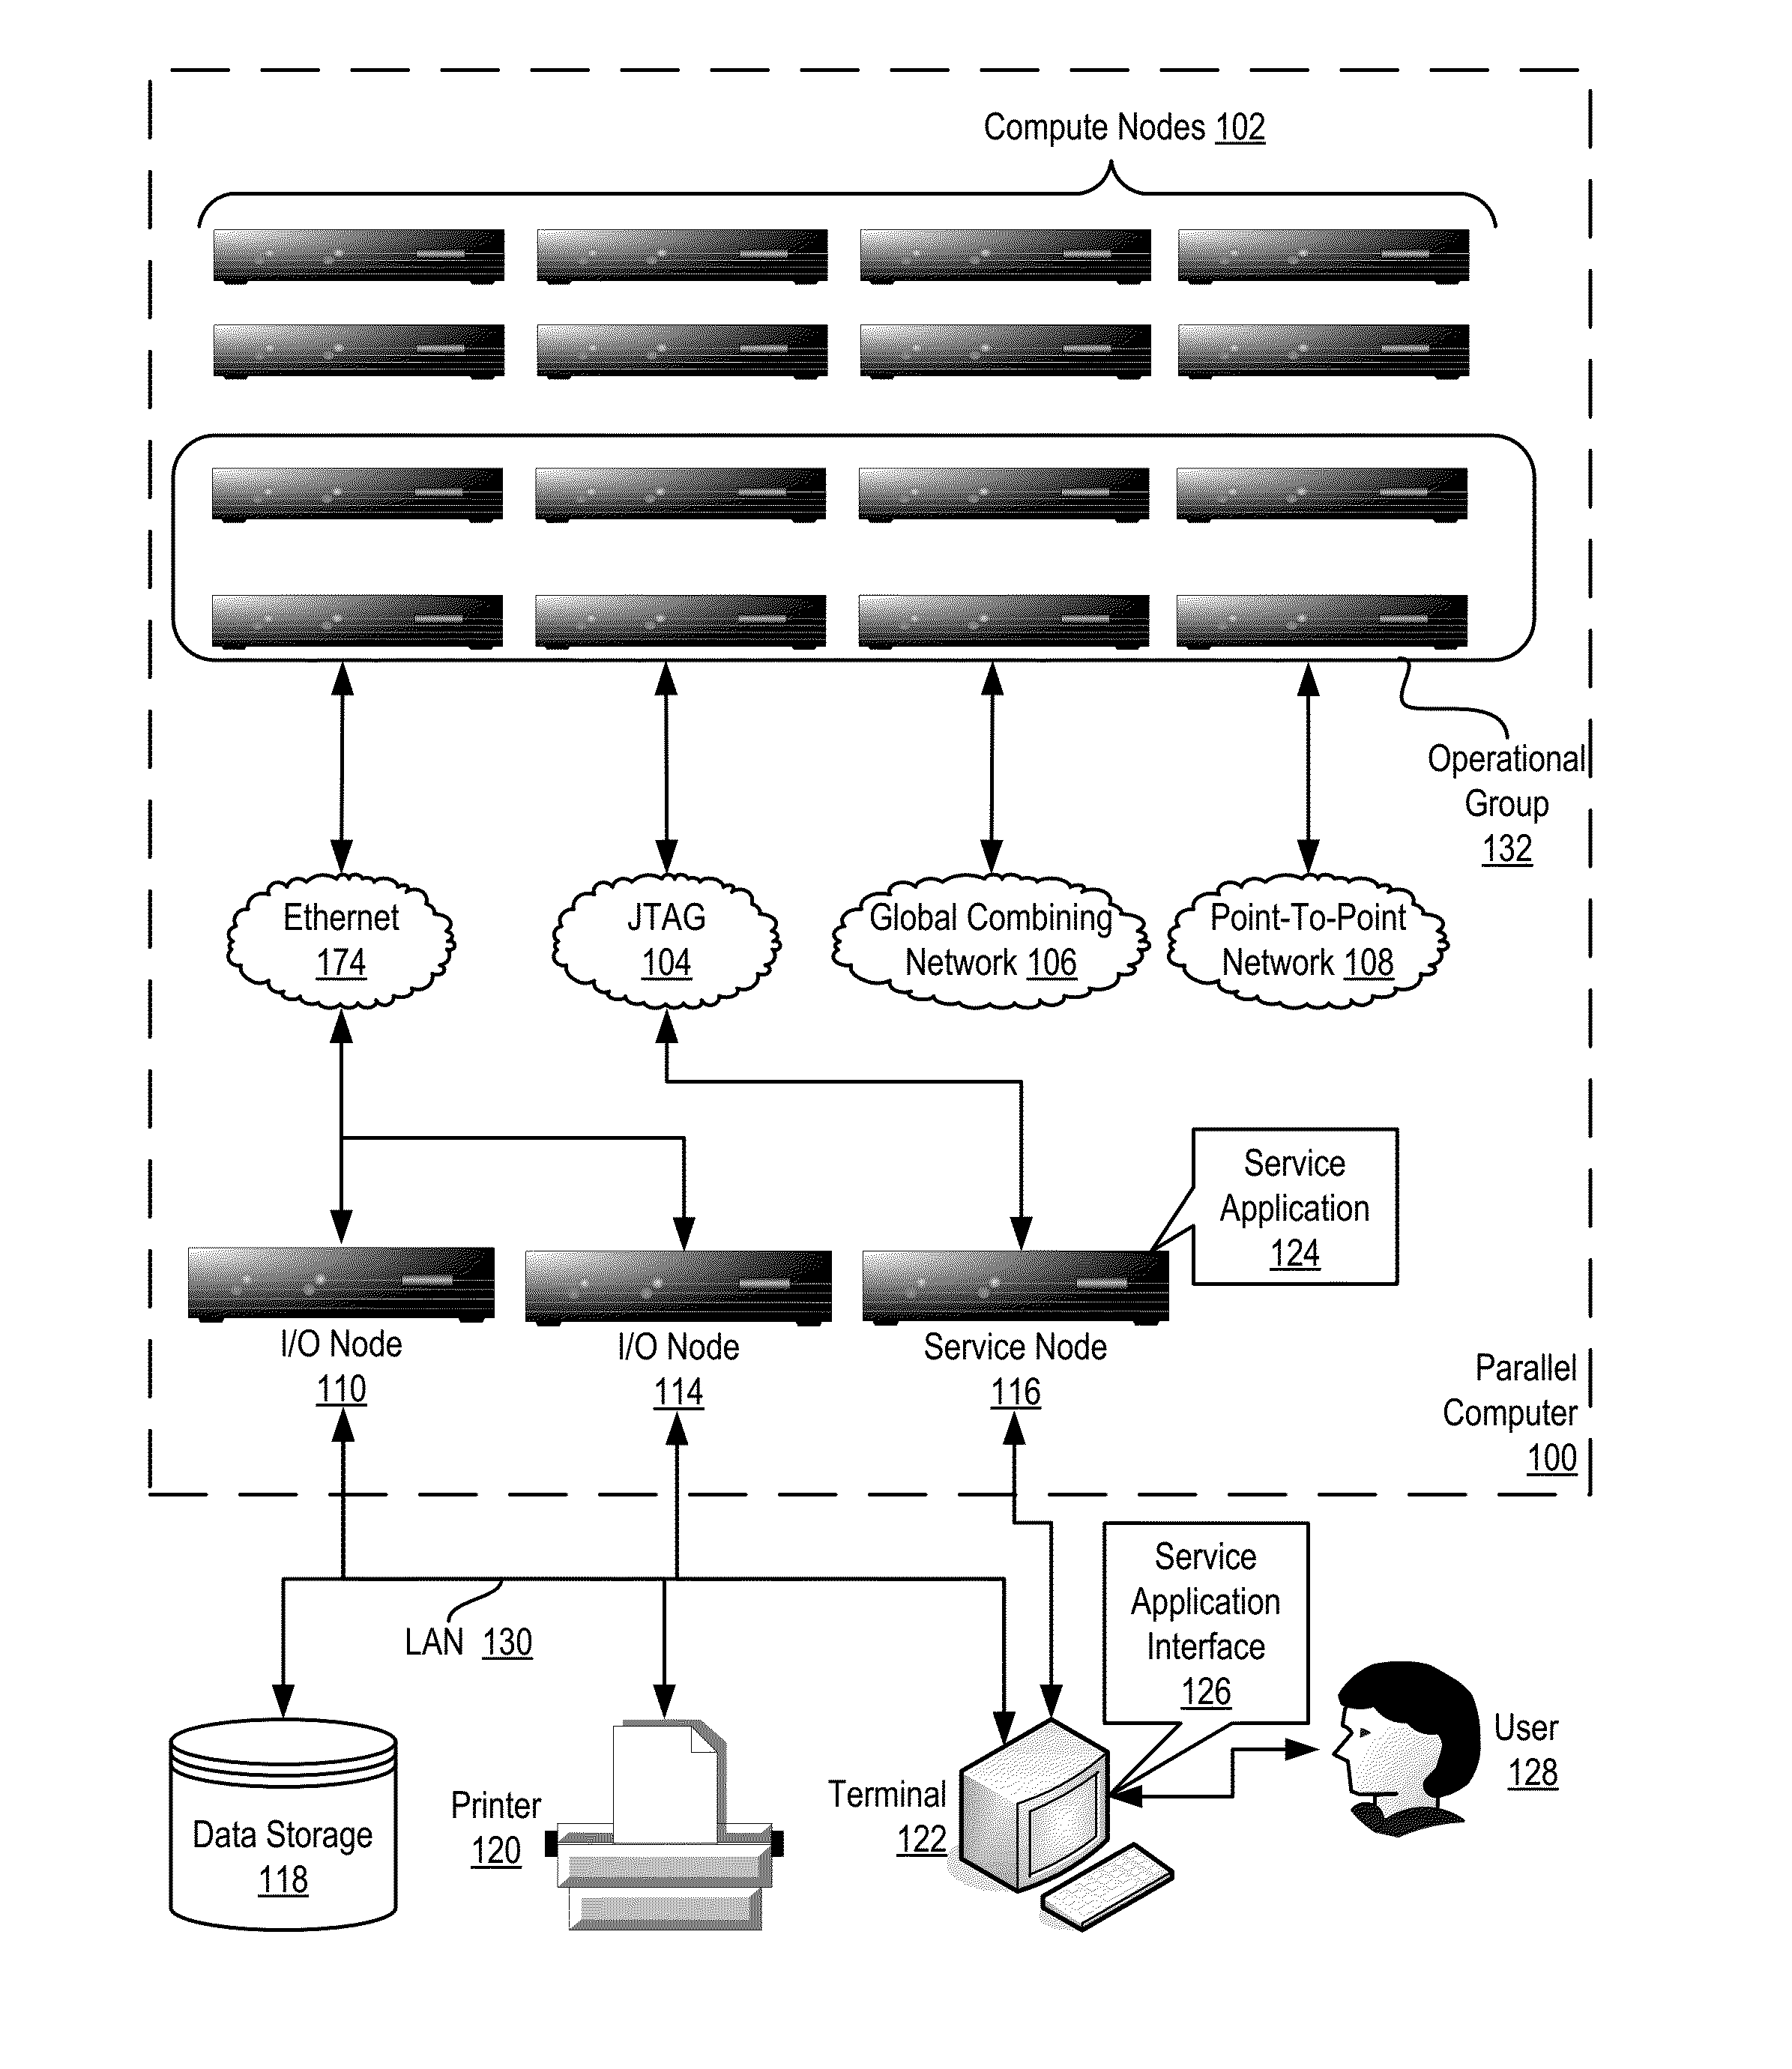 Administering virtual machines in a distributed computing environment